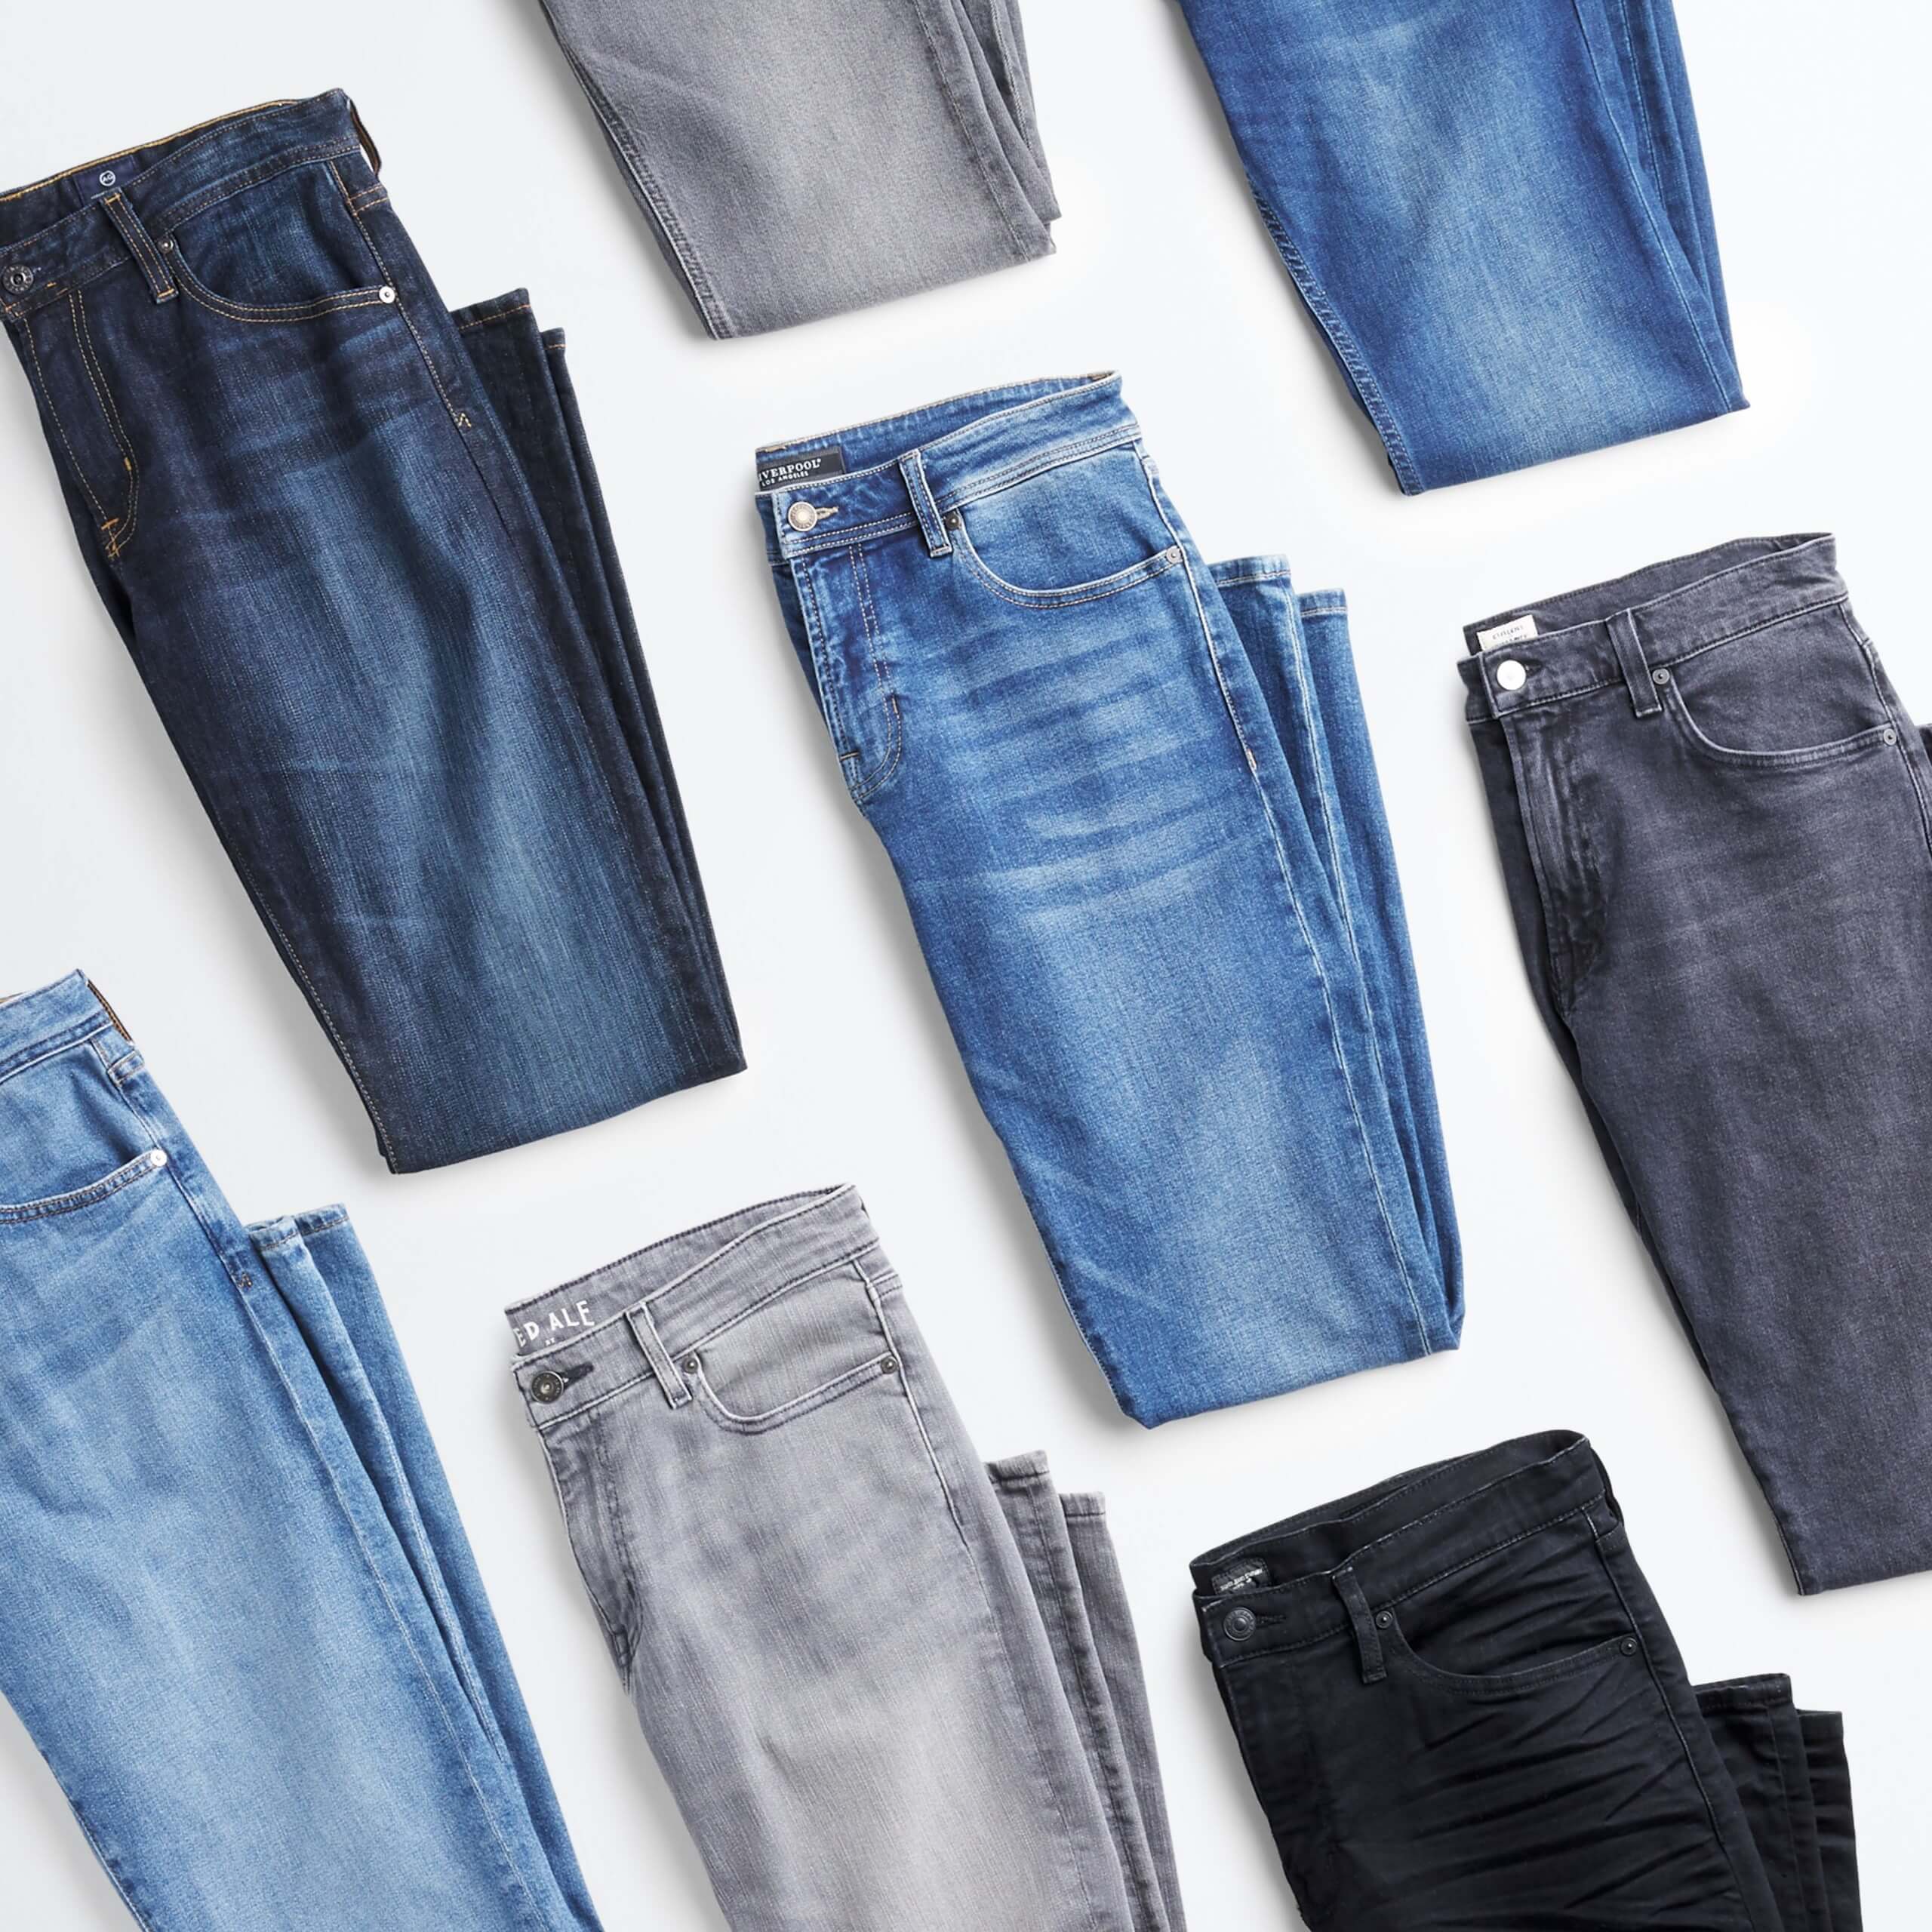 Best Jeans for Body Type Male: What's My Fit? - TAILORED ATHLETE - USA